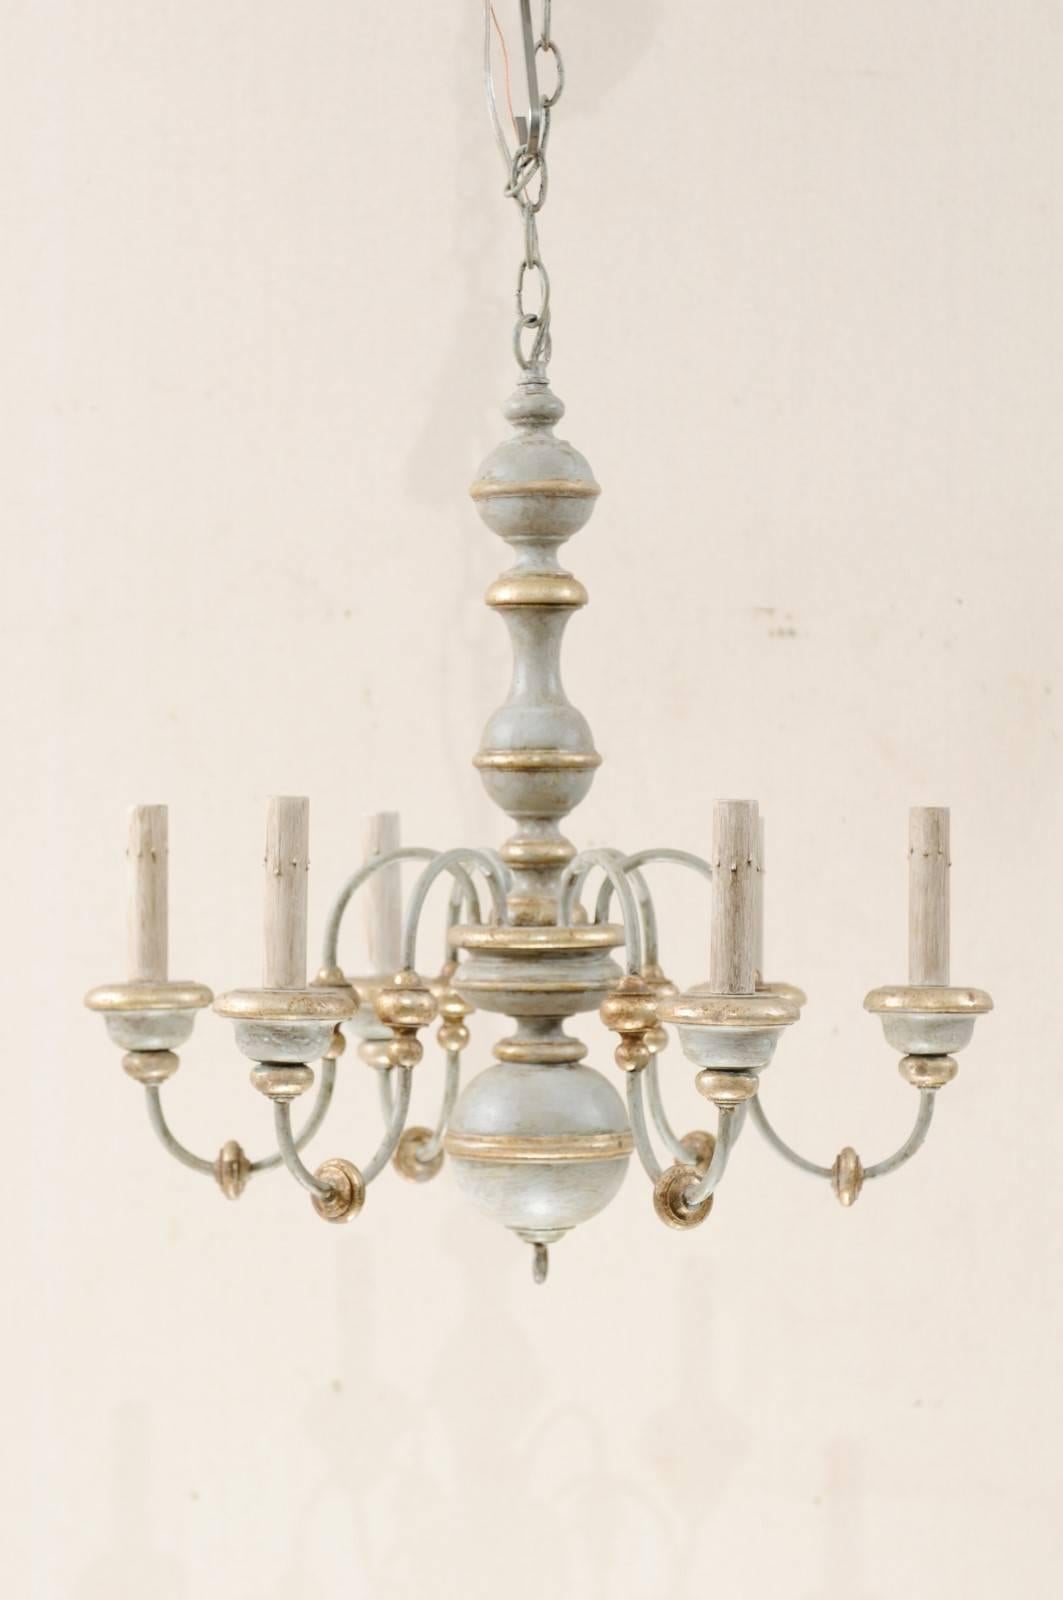 An Italian six-light painted wood and metal chandelier. This lovely mid-20th century Italian chandelier features a carved wood column with fluid s-shaped swooping arms lifting up and out from it's center. This column features a serious of bulbous